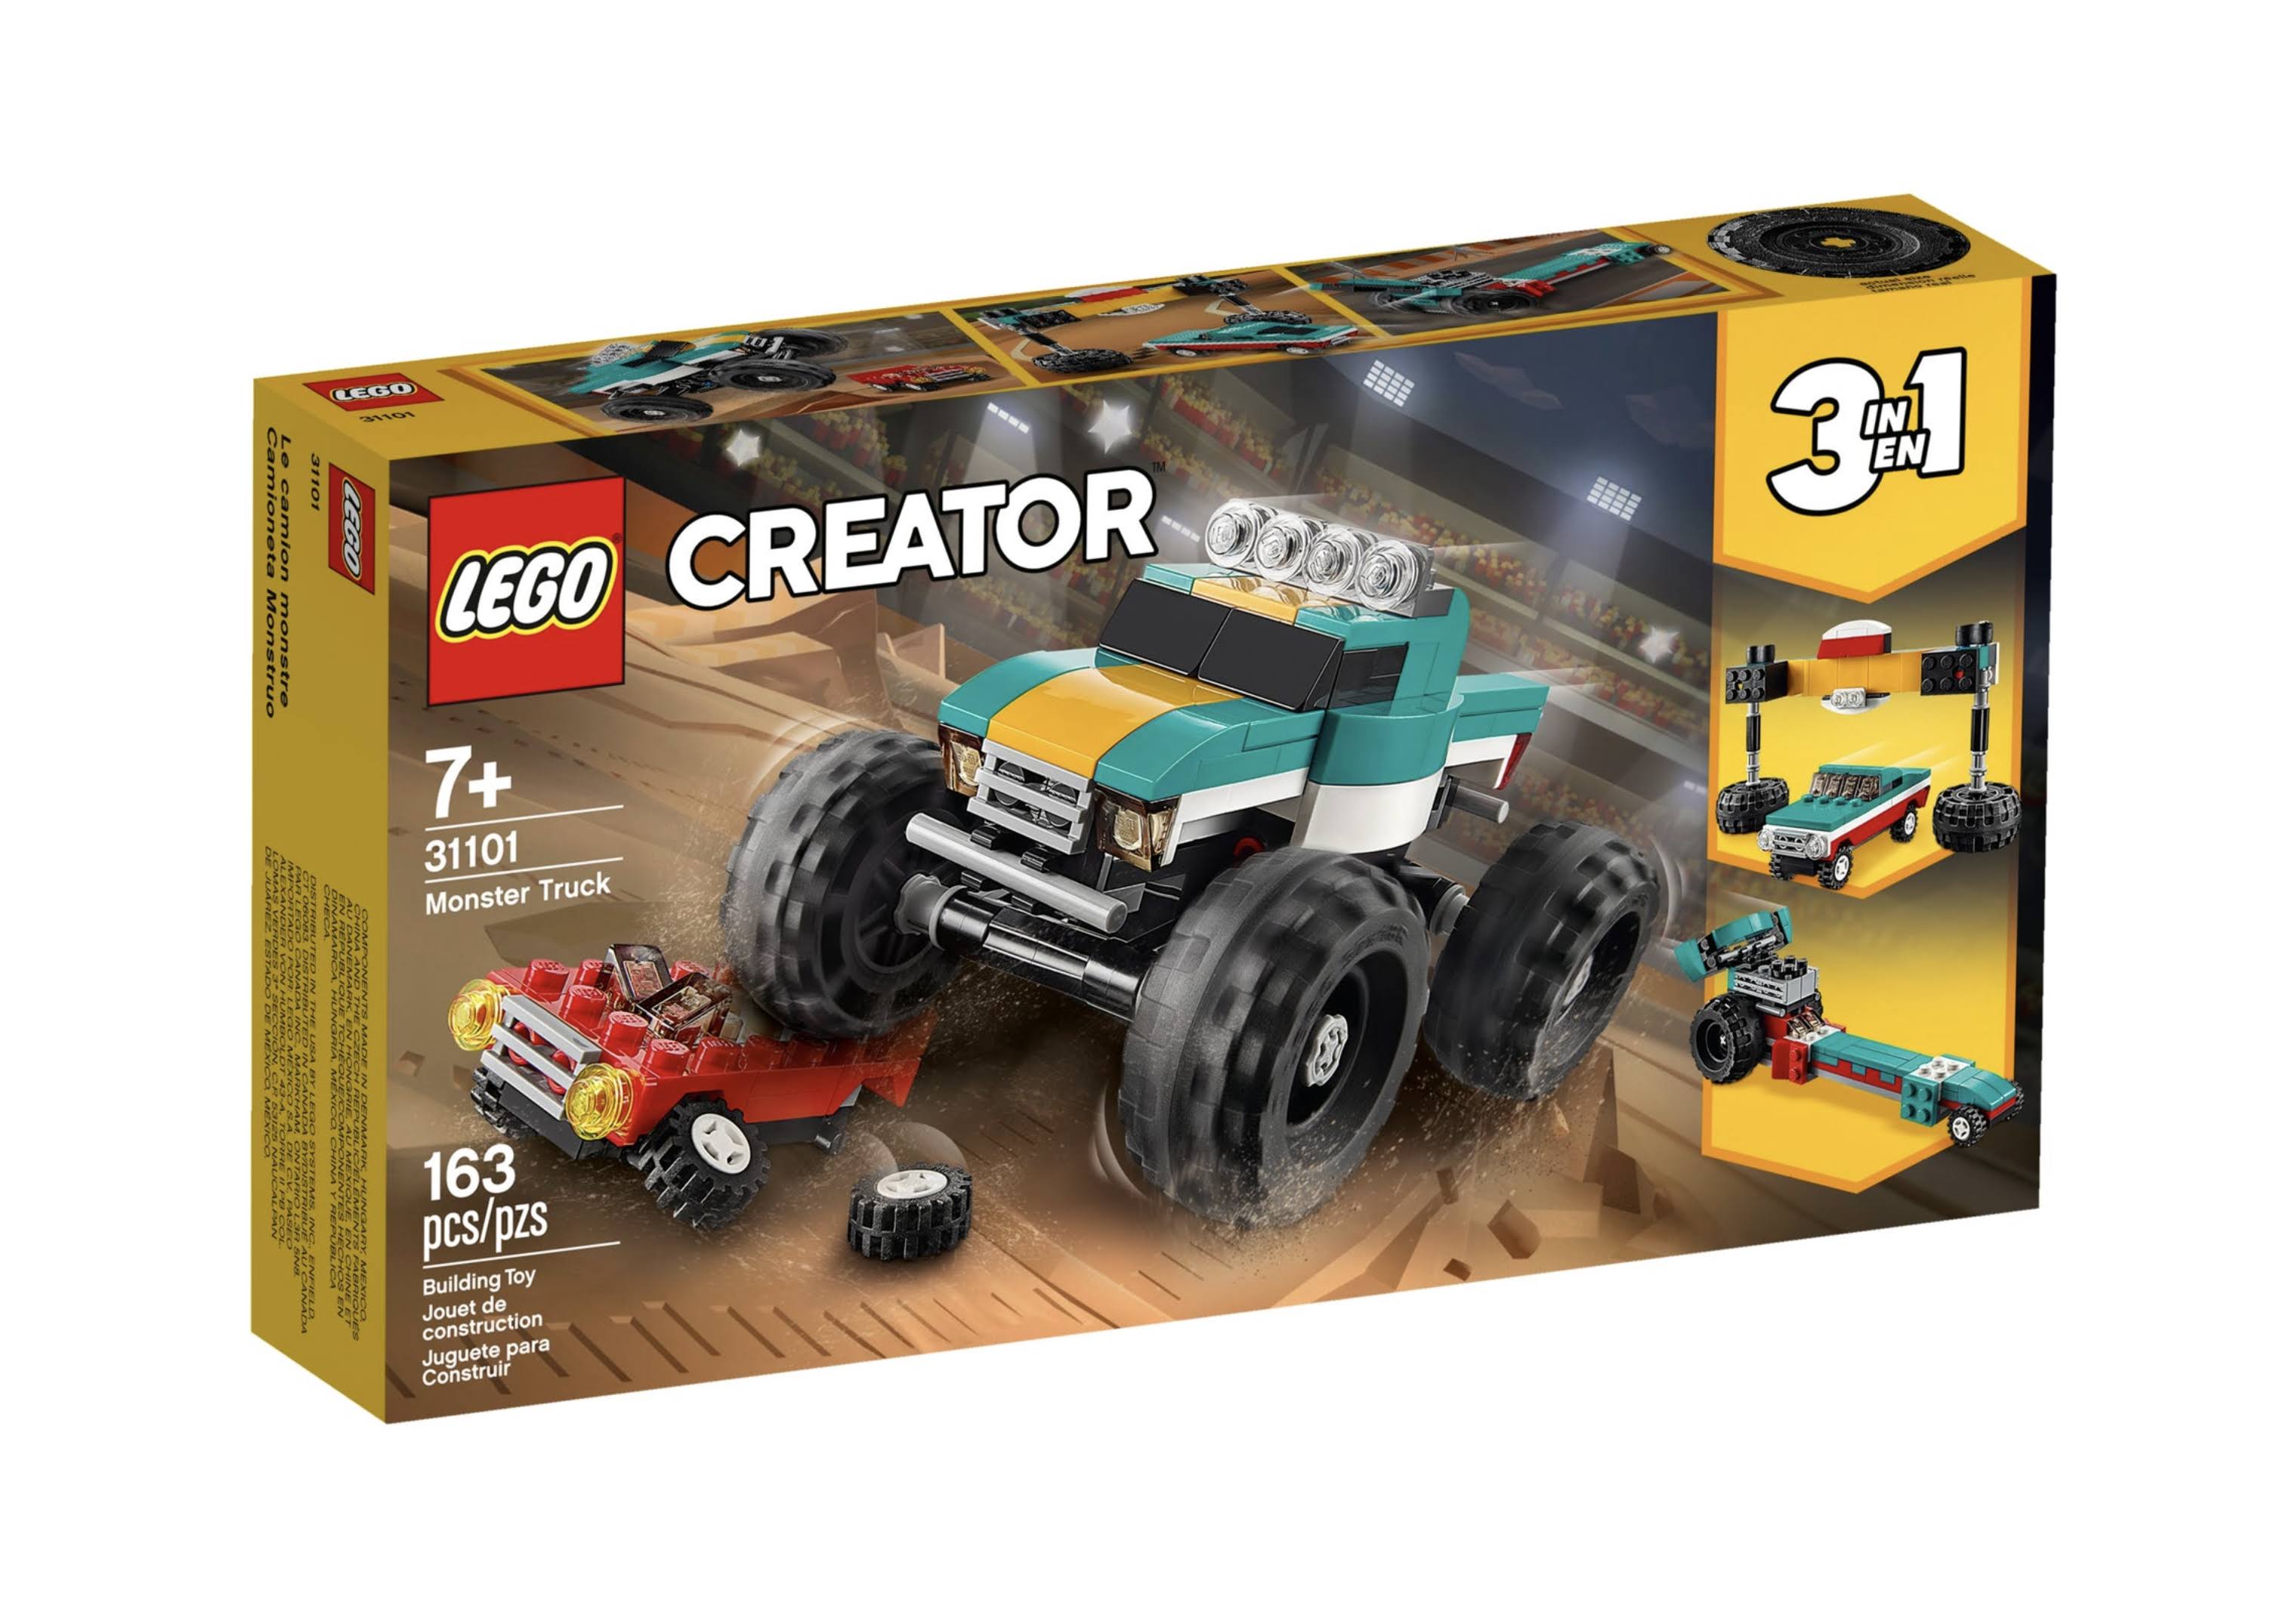 LEGO Creator 3in1 Monster Truck Toy 31101 Cool Building Kit For Kids